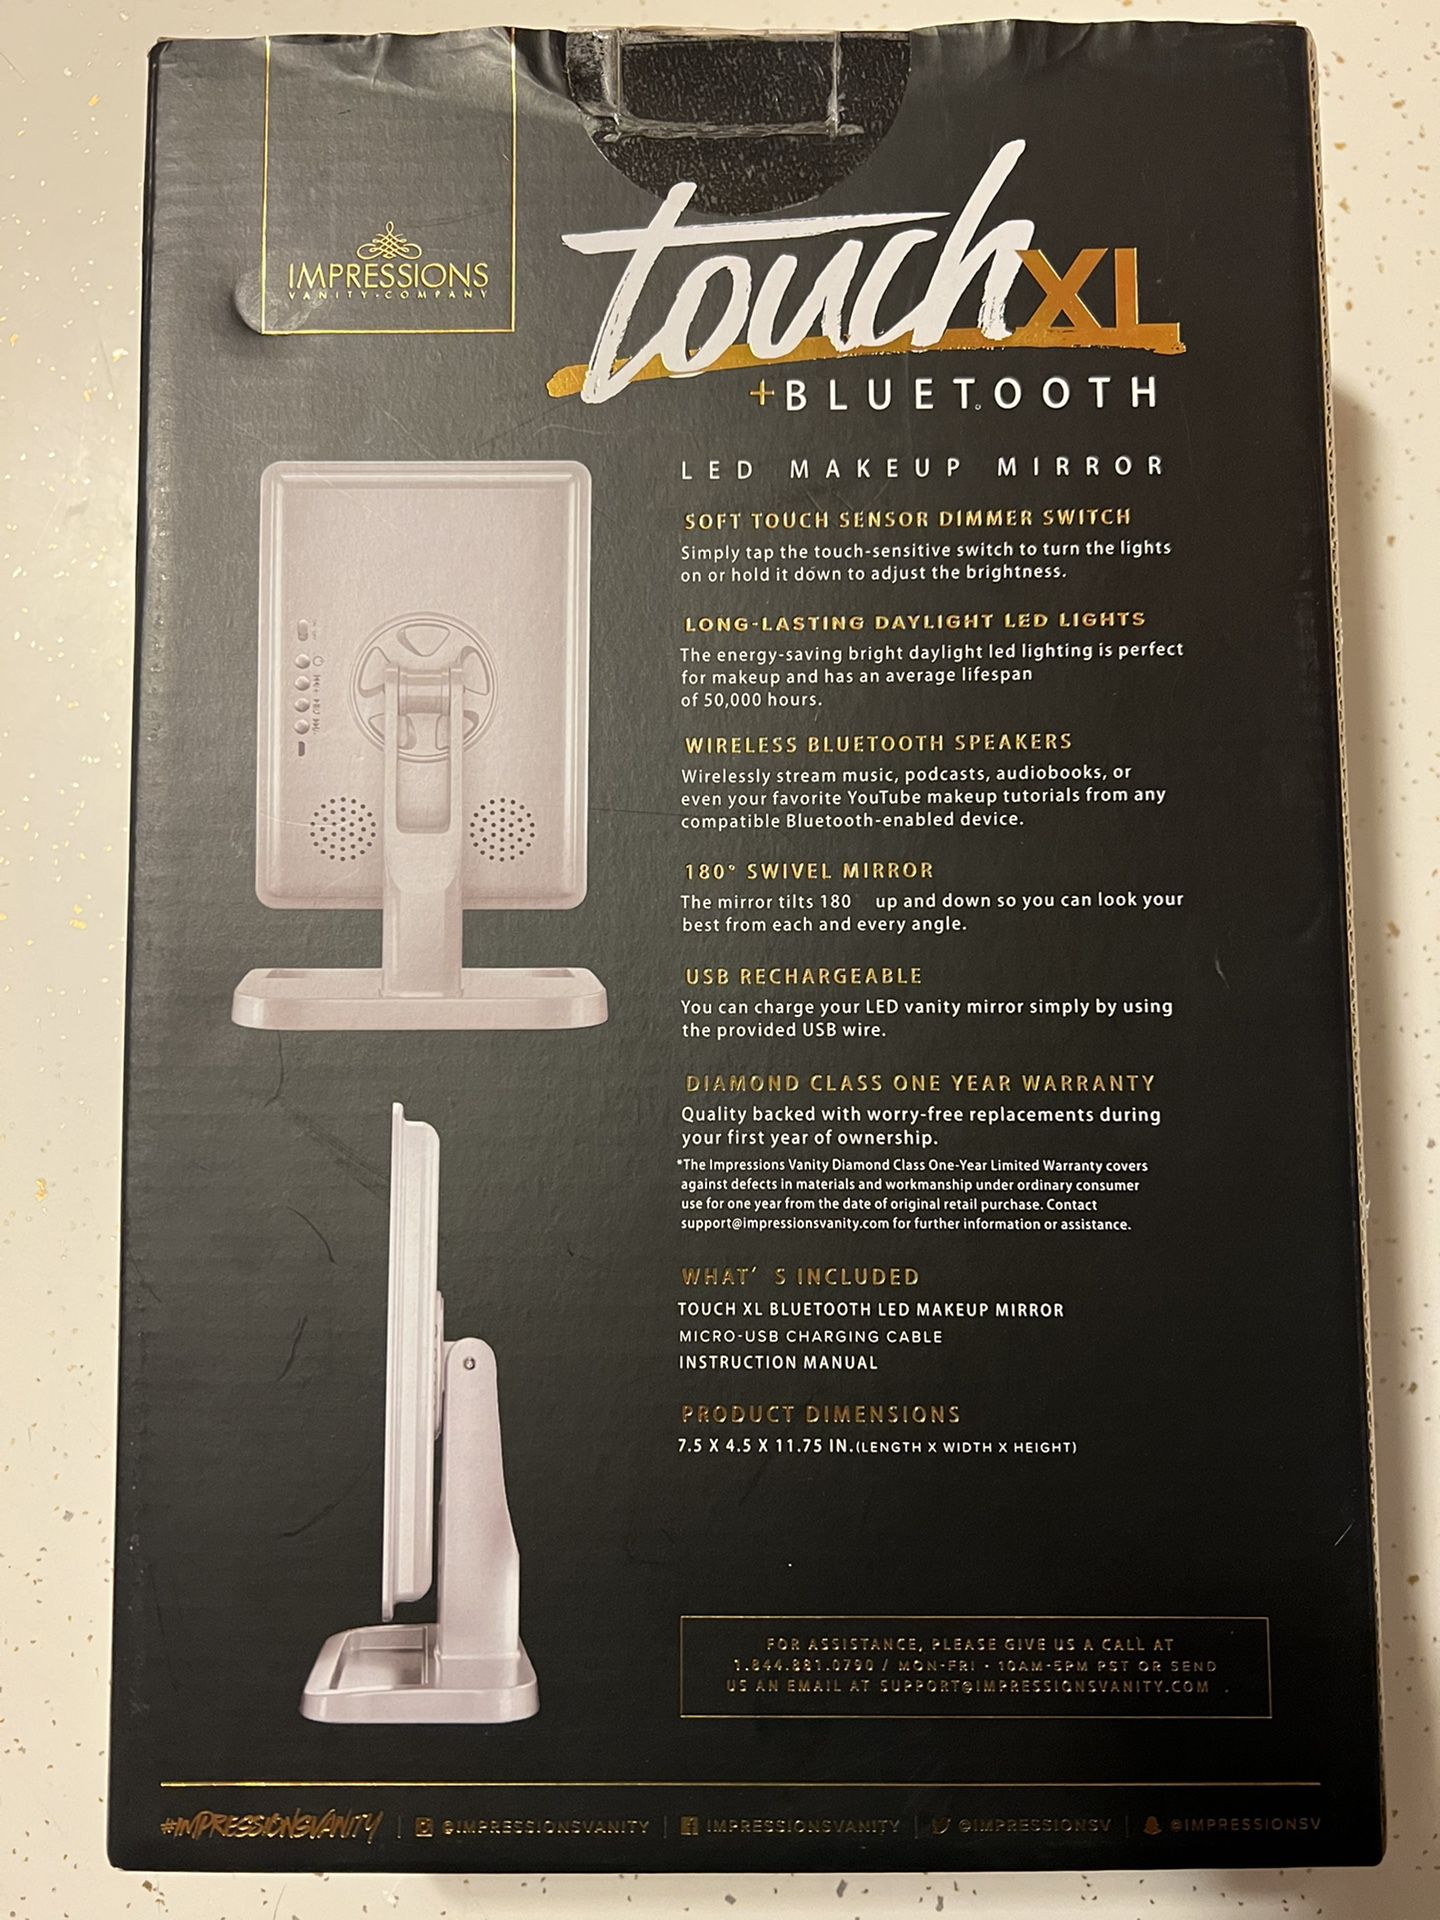 Impressions Vanity Touch XL bluetooth 